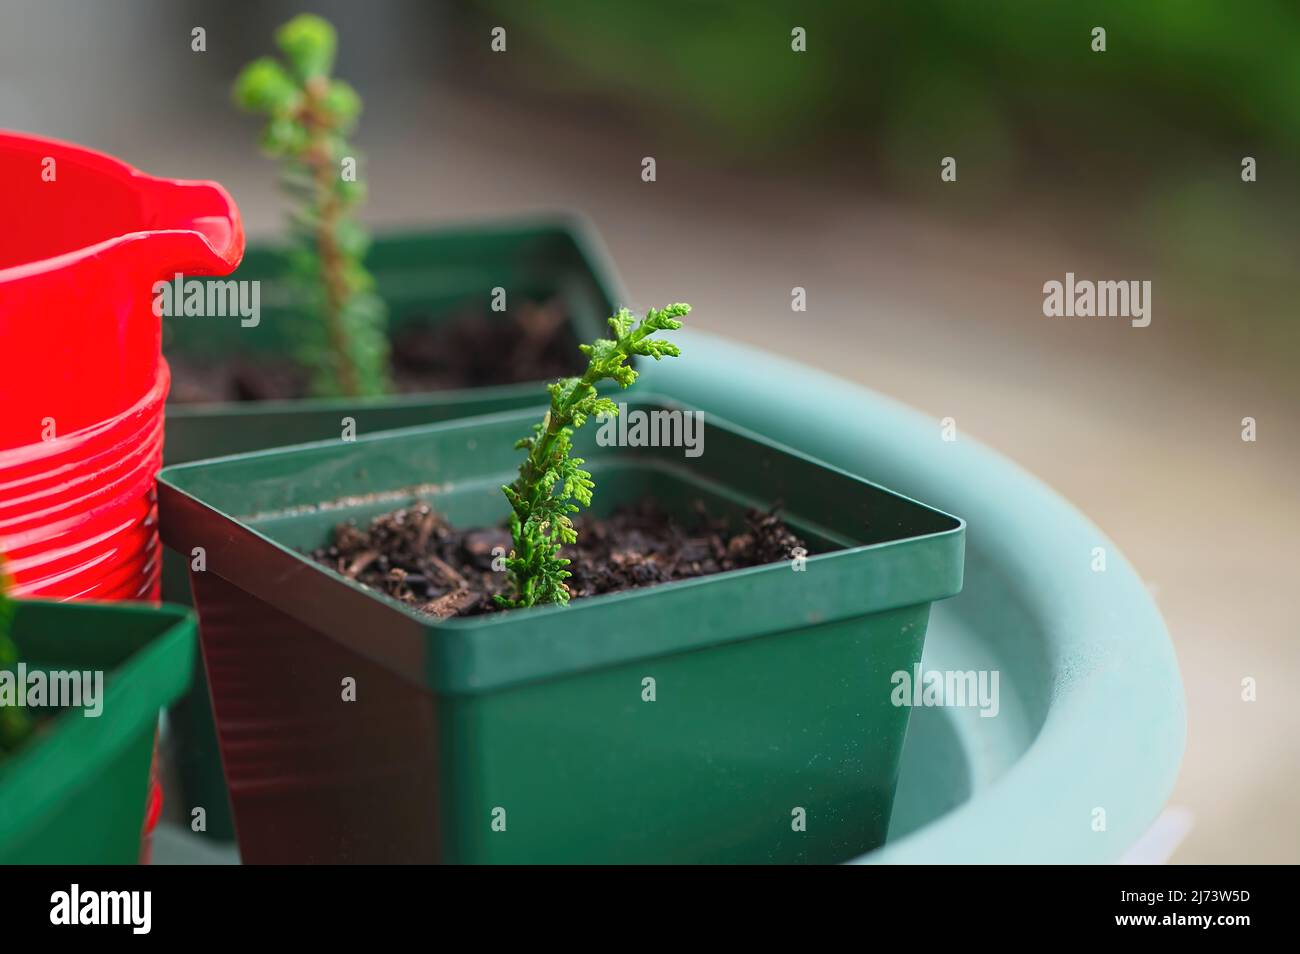 An evergreen cutting in a plant pot with copy space. Stock Photo